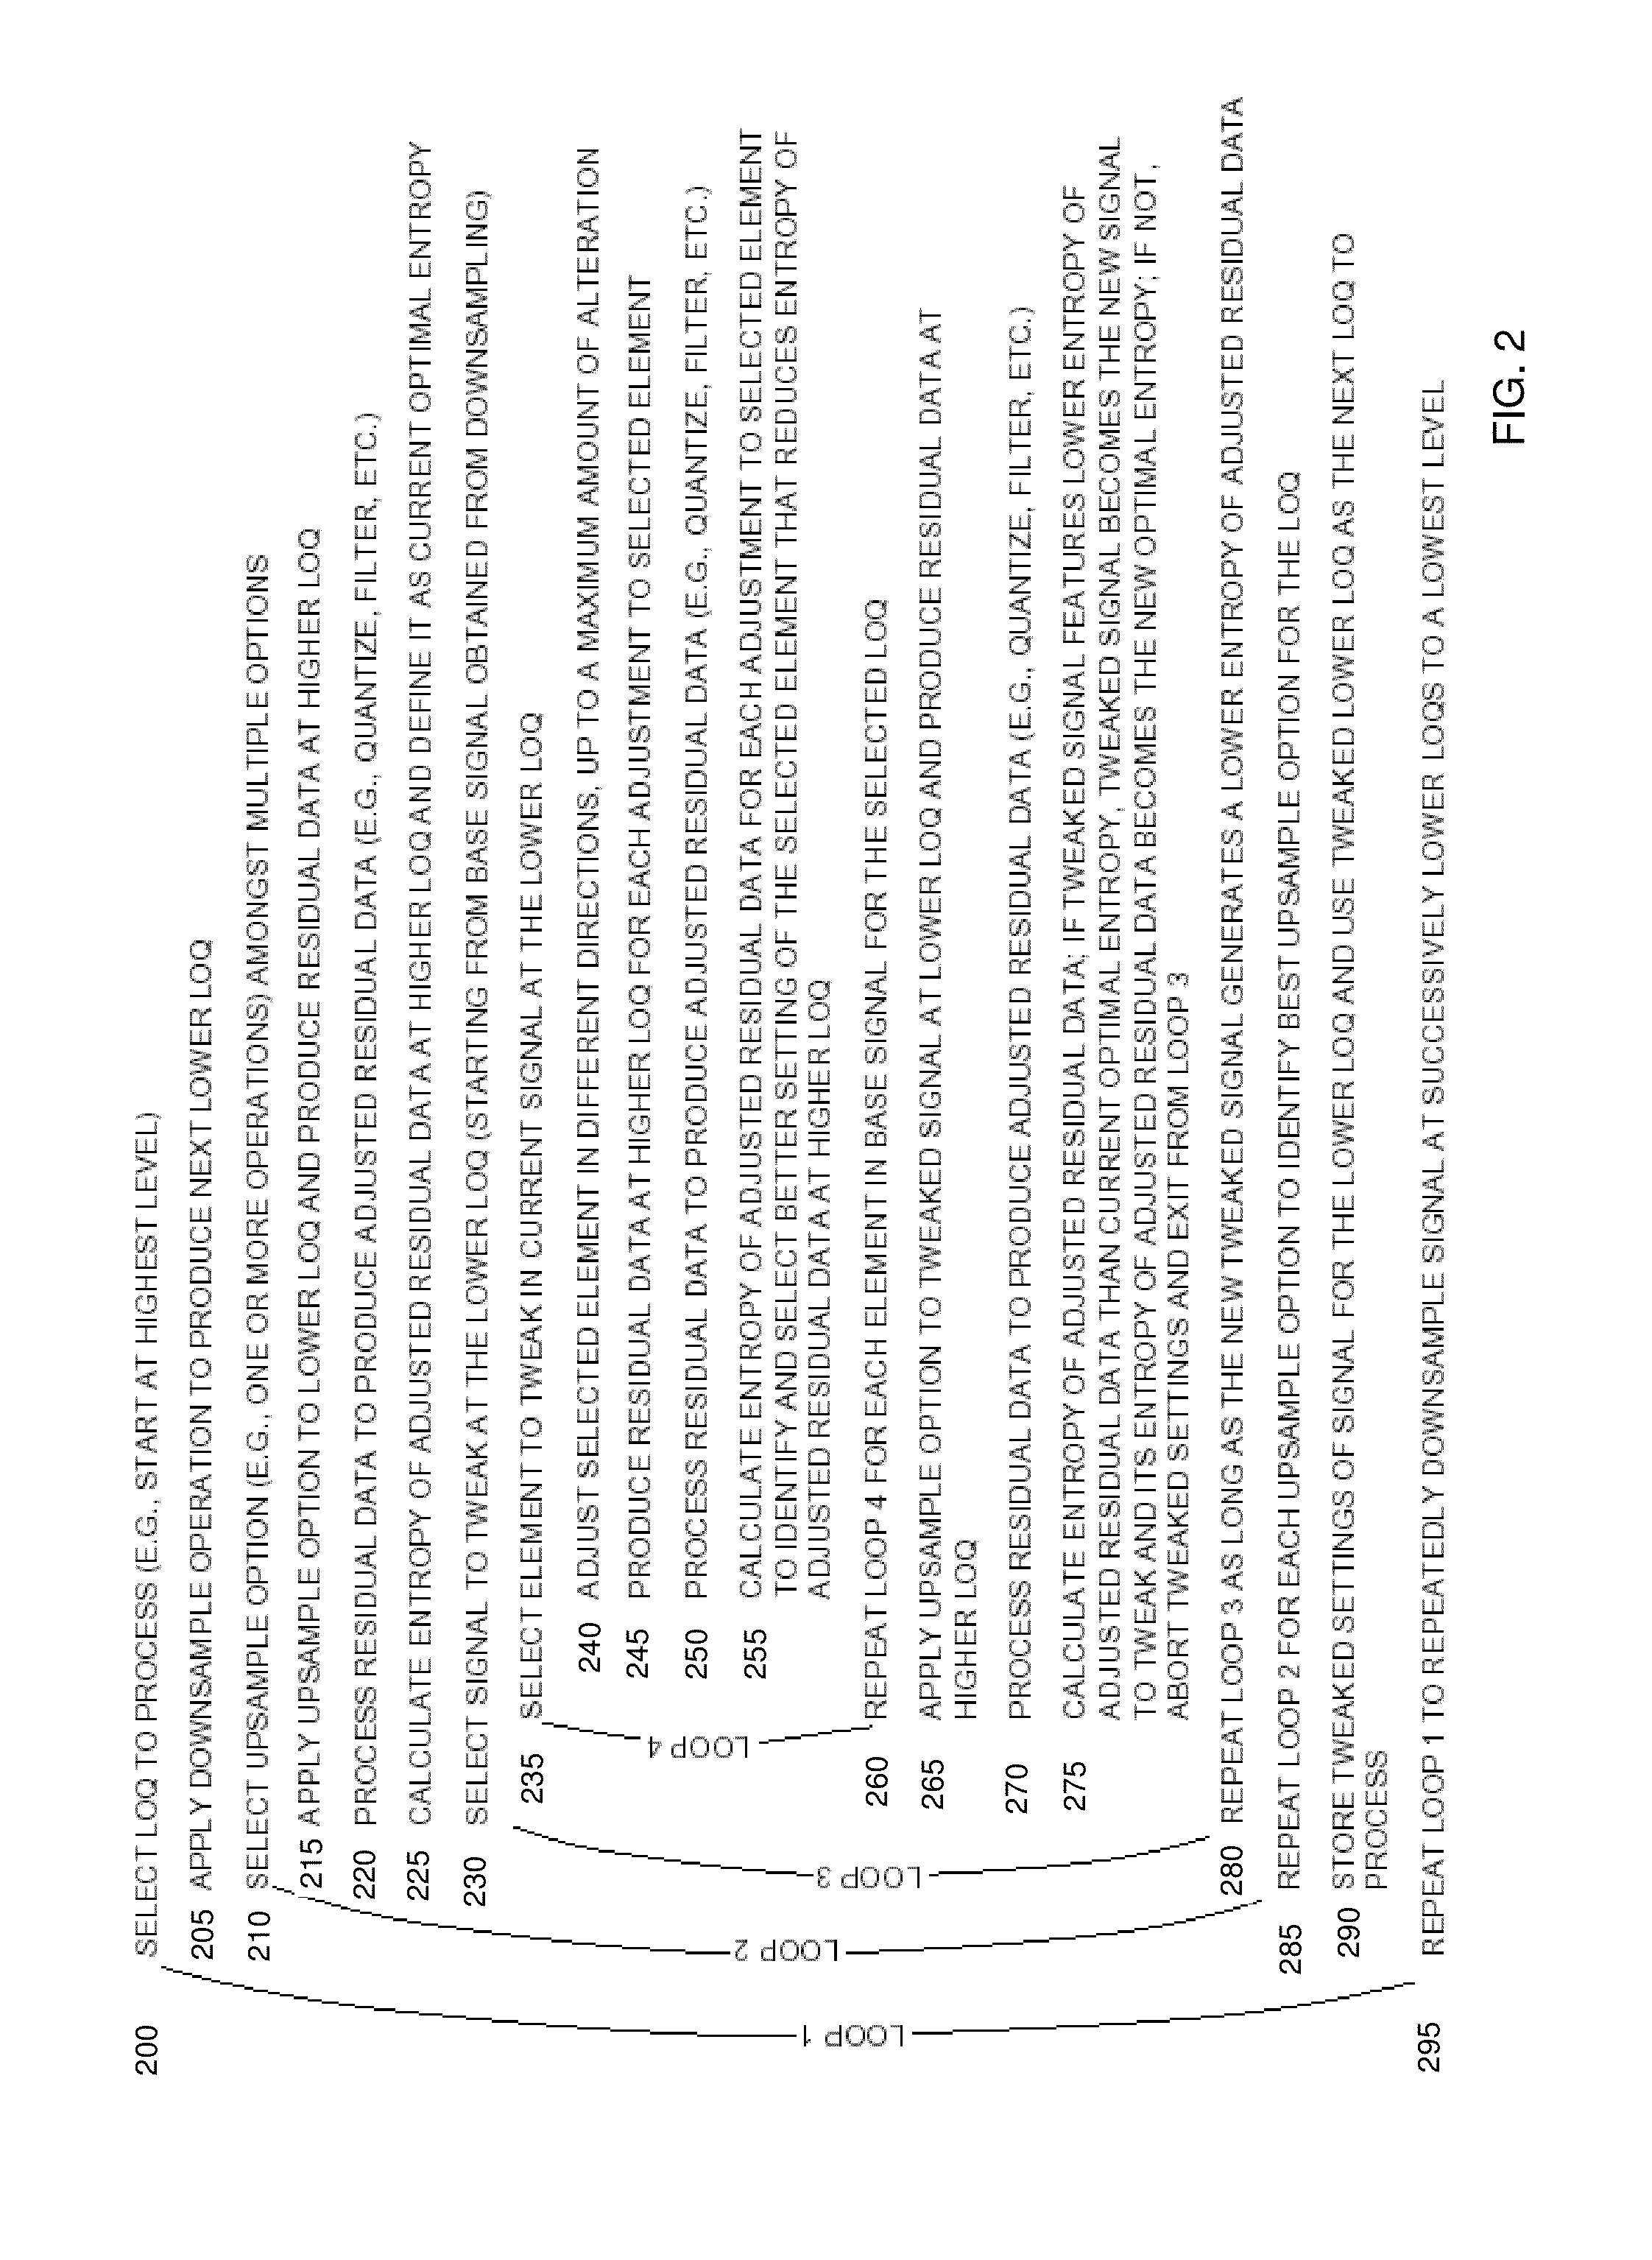 Signal processing and tiered signal encoding